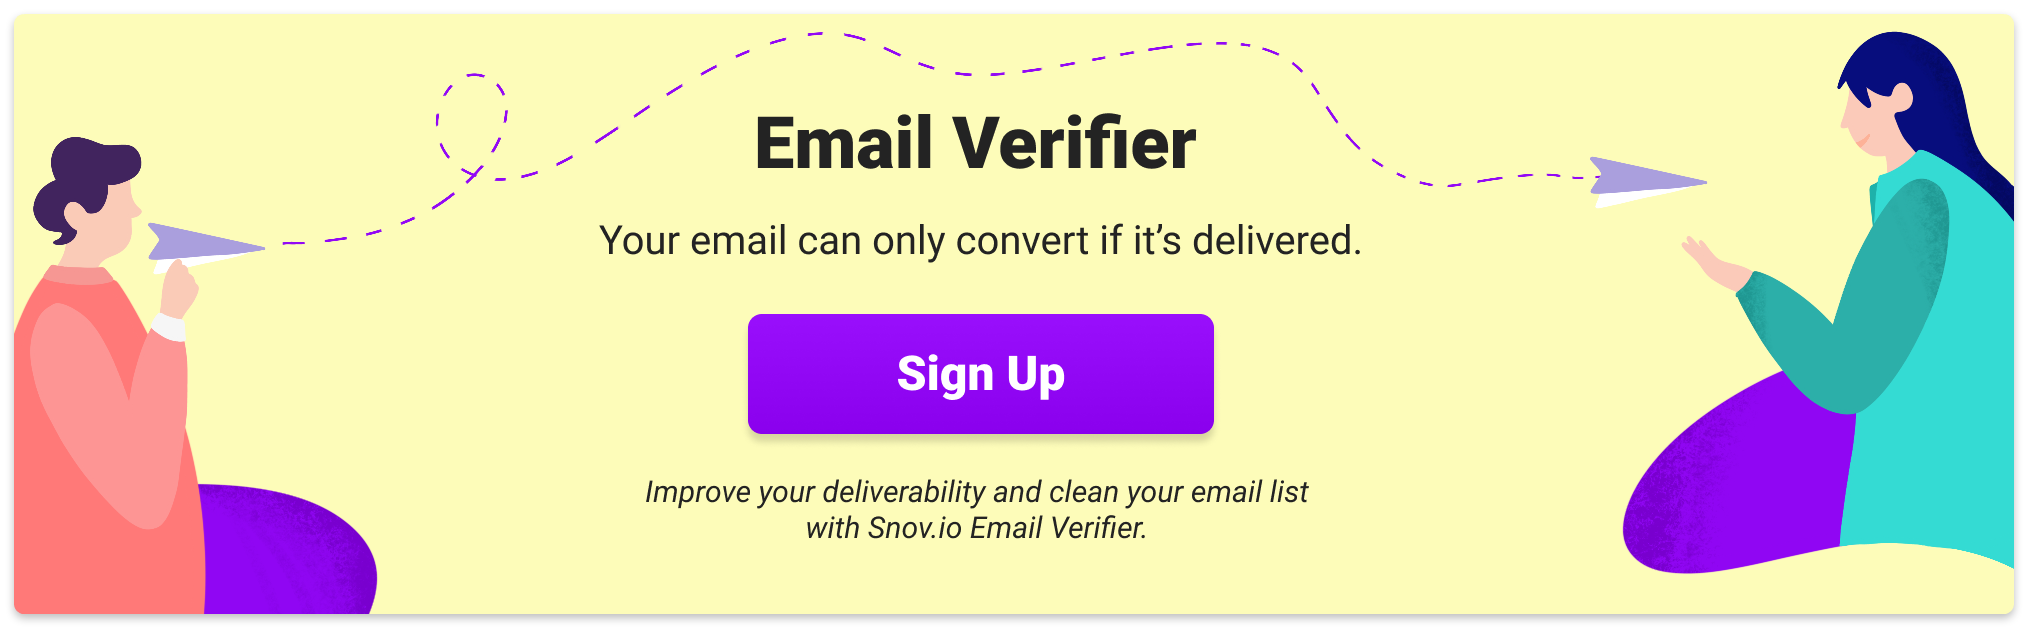 Email verifier - try for free